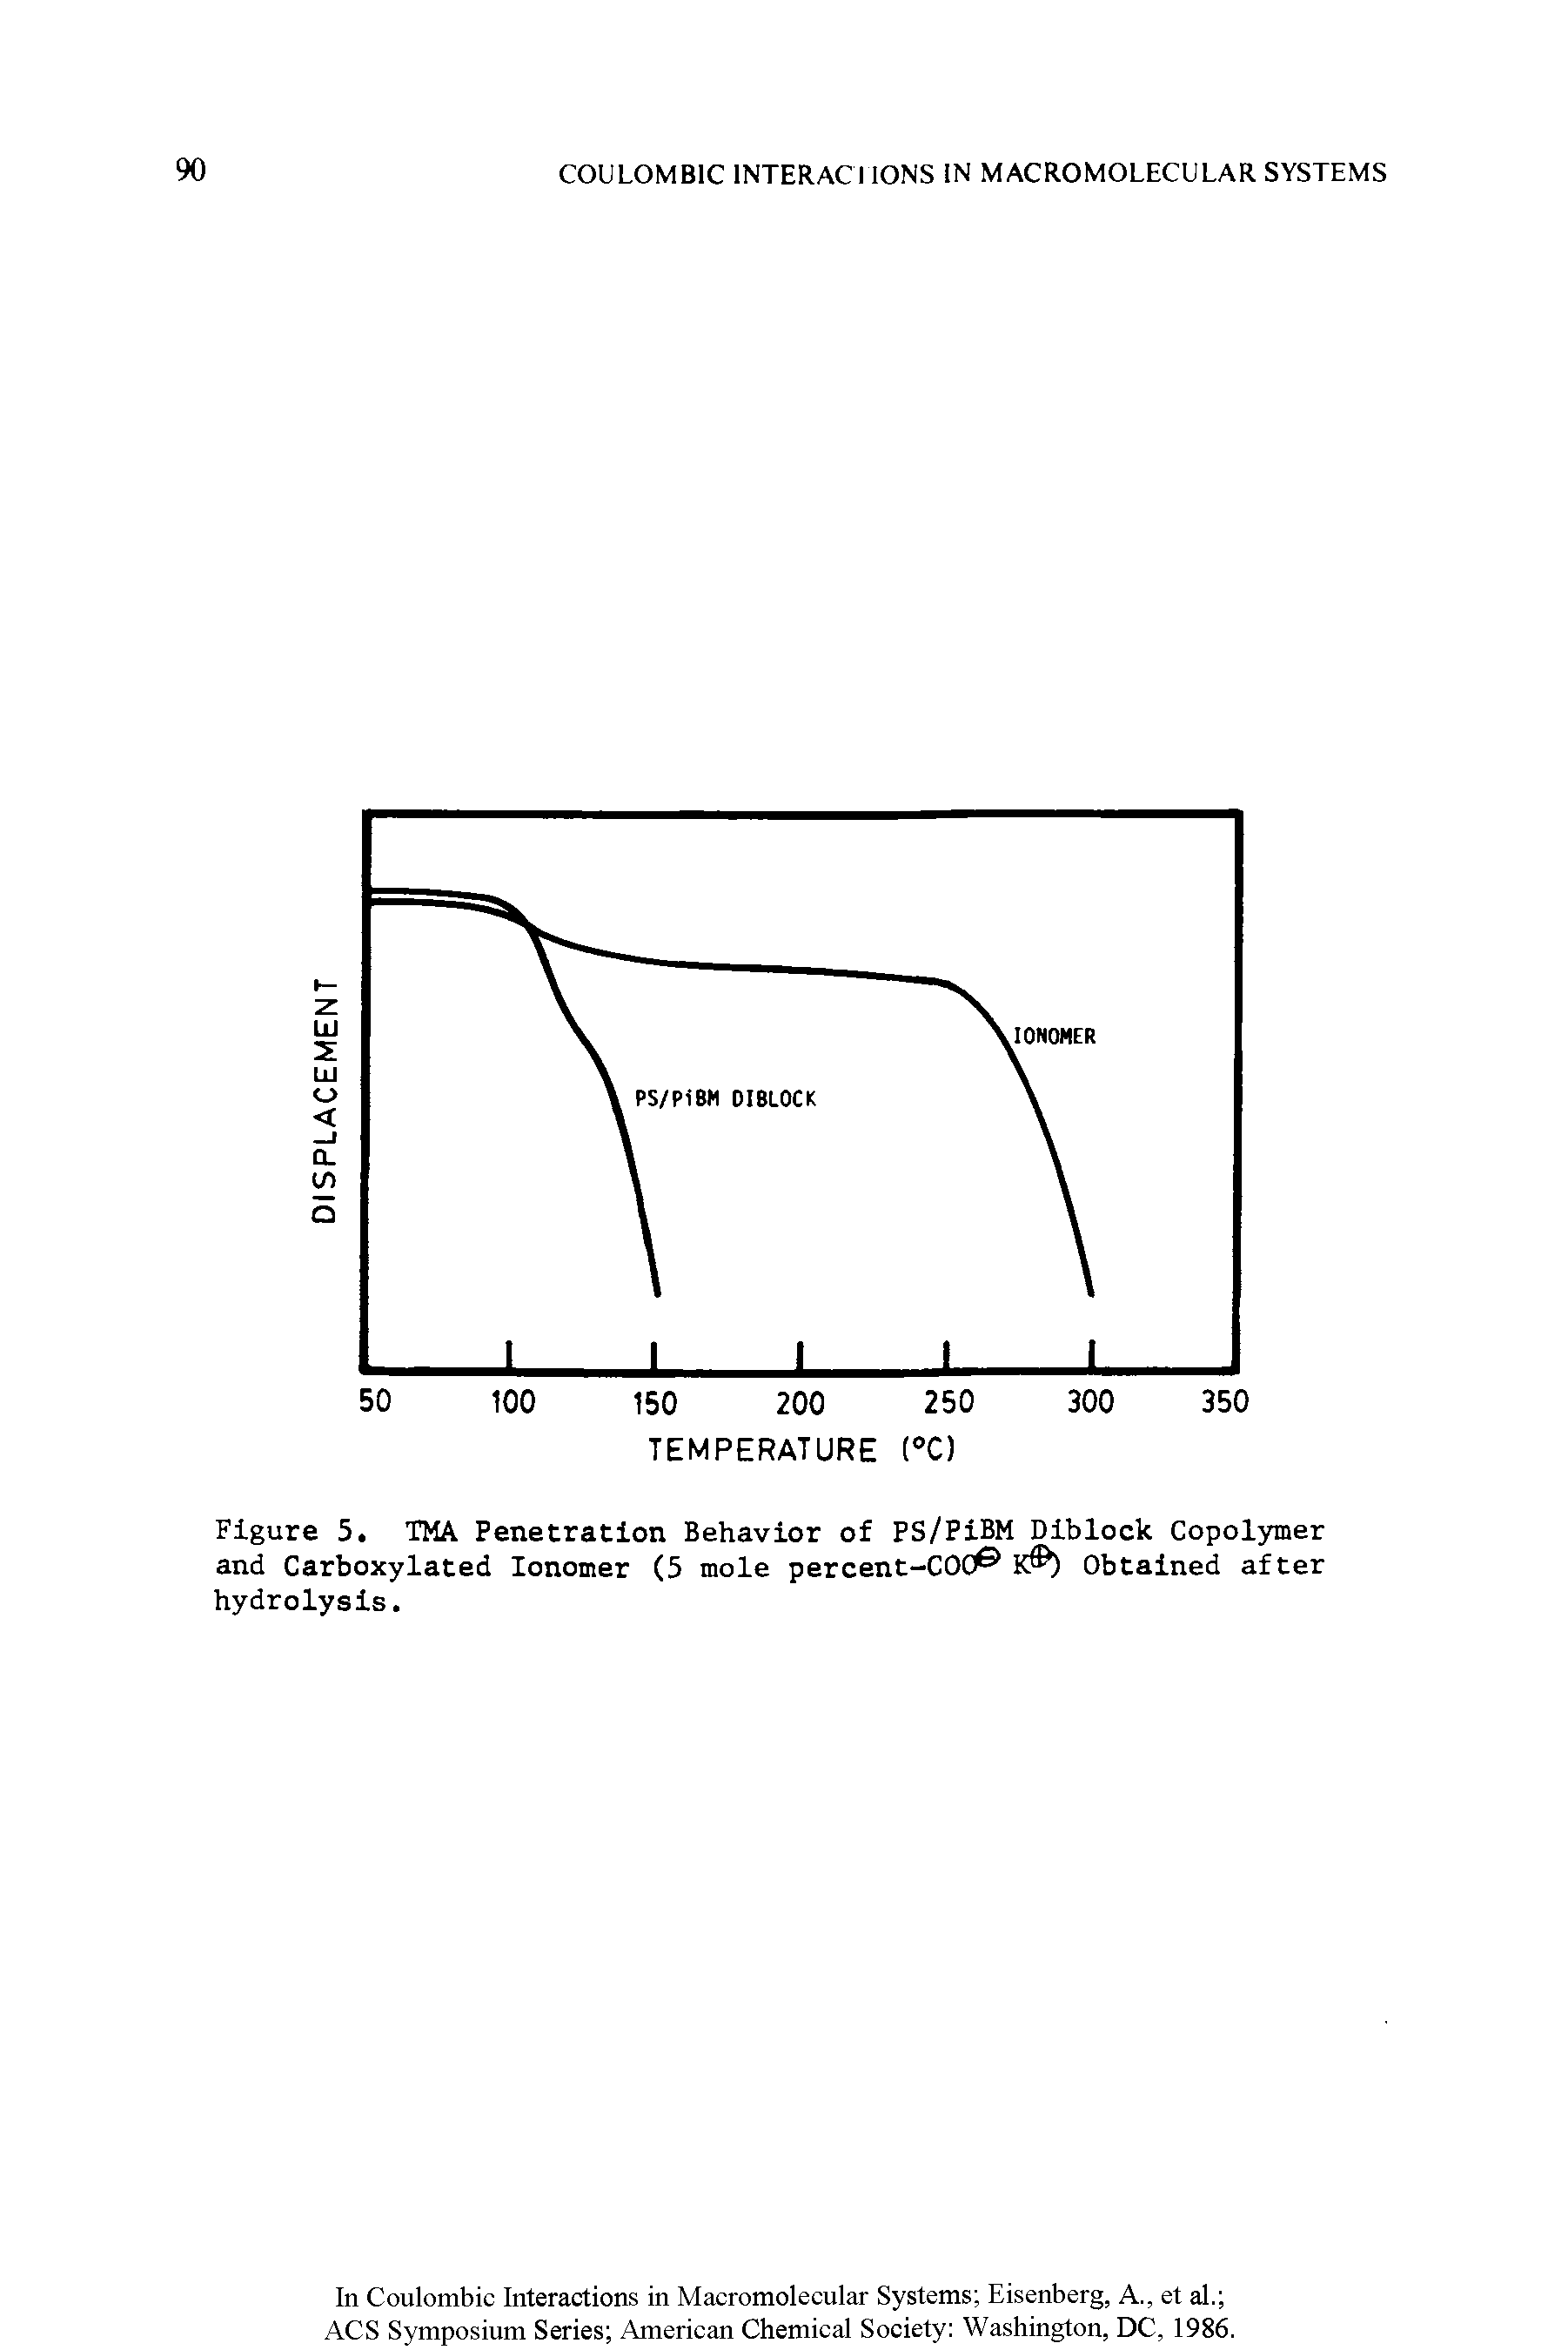 Figure 5. TMA Penetration Behavior of PS/PiBM Diblock Copolymer and Carboxylated Ionomer (5 mole percent-COC K ) Obtained after hydrolysis.